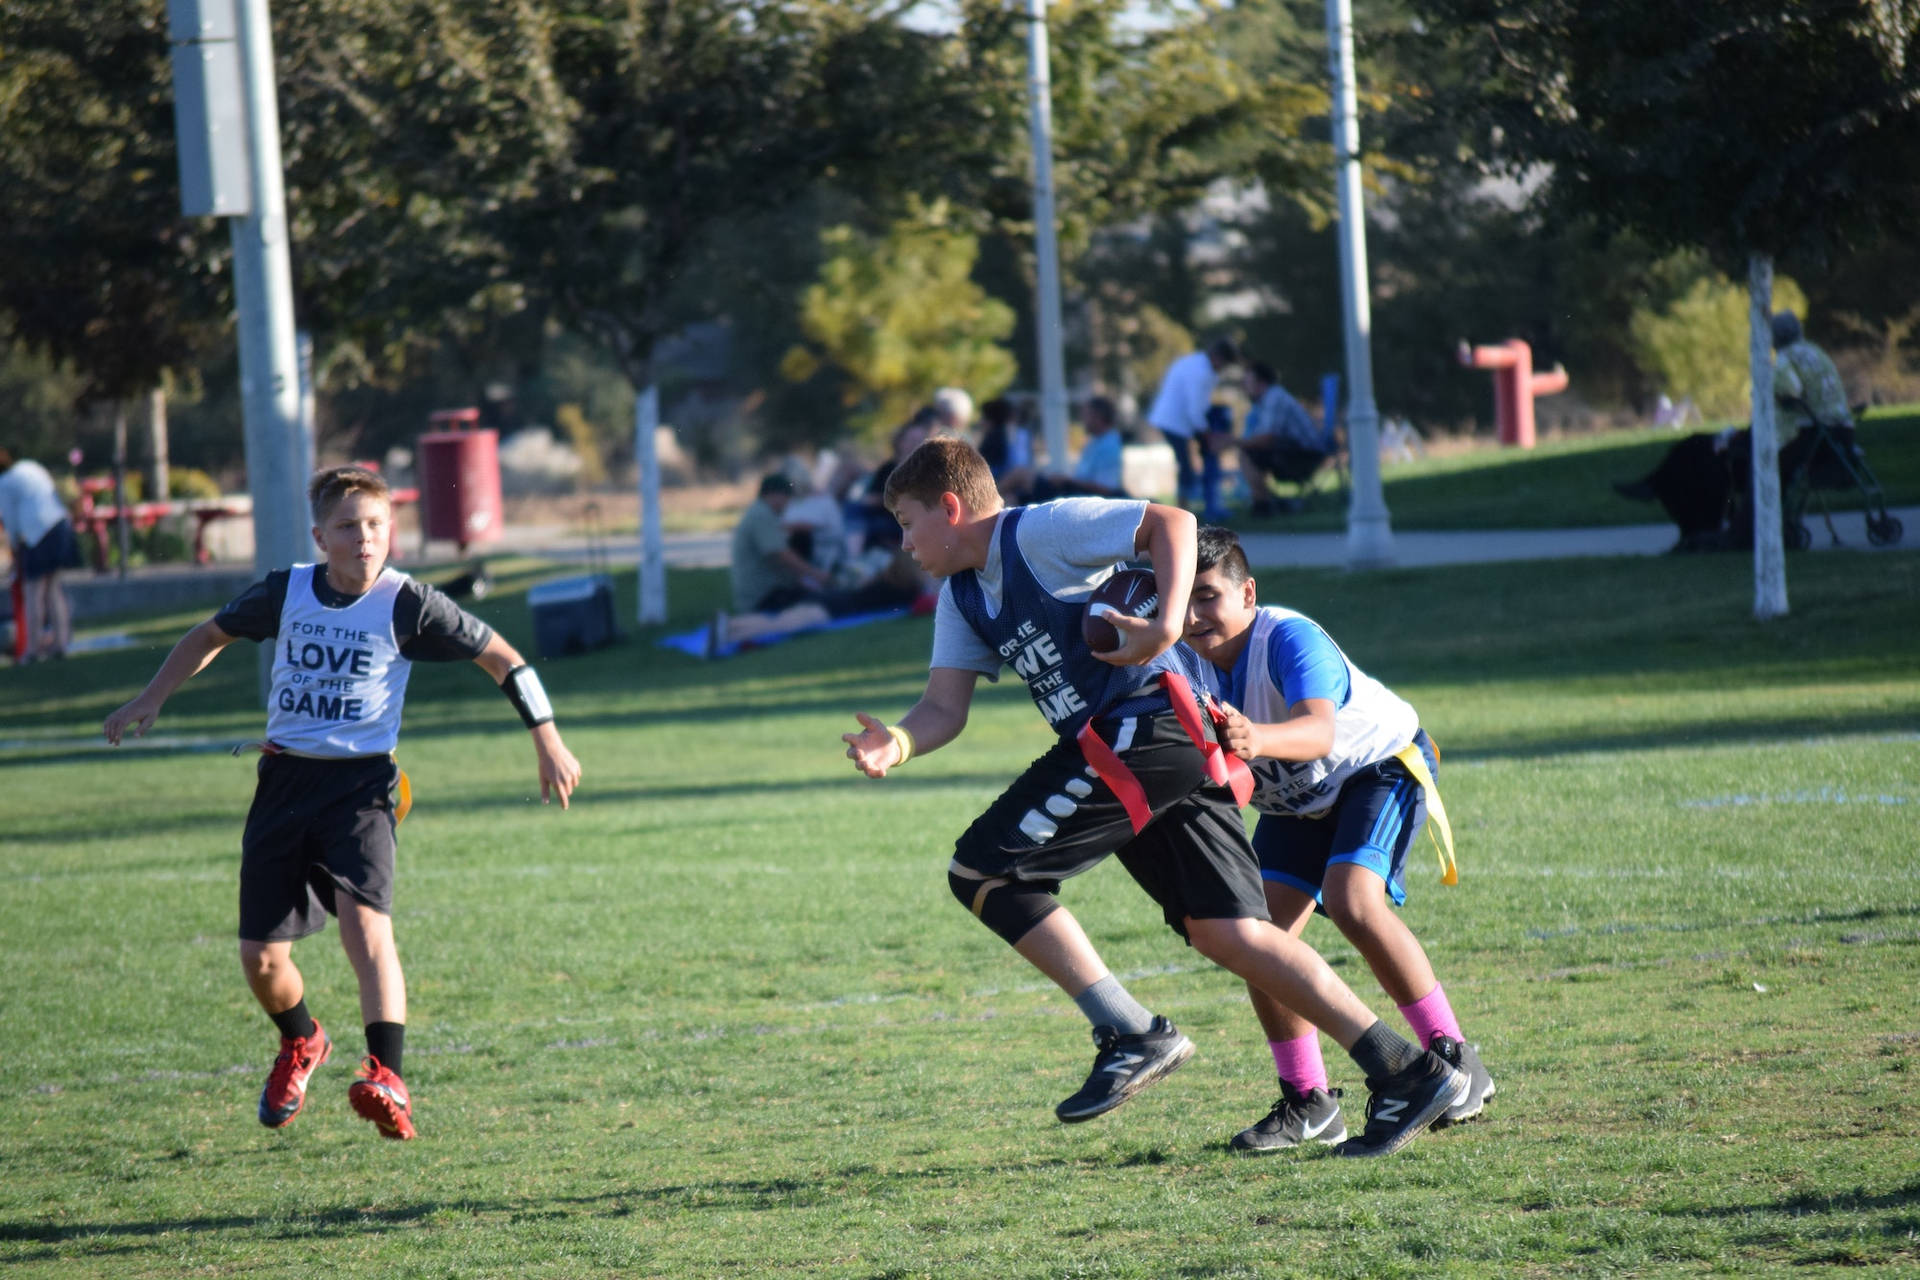 Energetic Young Players in an Exciting Flag Football Match Wallpaper